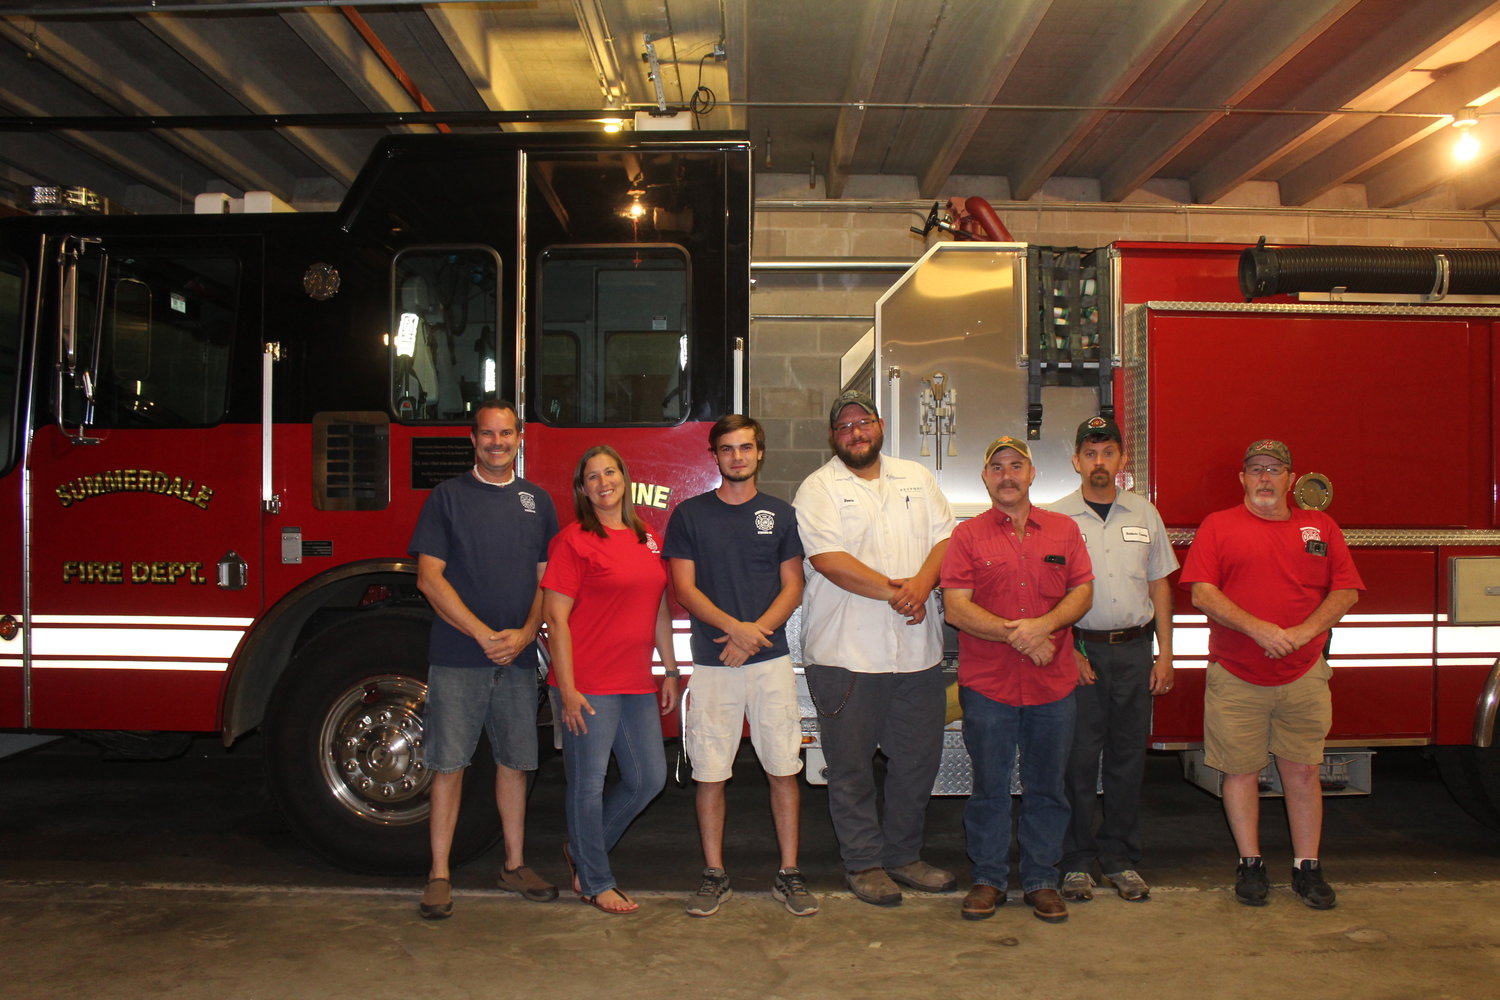 From left to right: Interim Assistant Chief Derrick Givens; Tiffany Givens; Derek Cutts; Reece Amelotte; Lane Clemons; Kenny Johnson; and Interim Chief Woody Kicklighter.